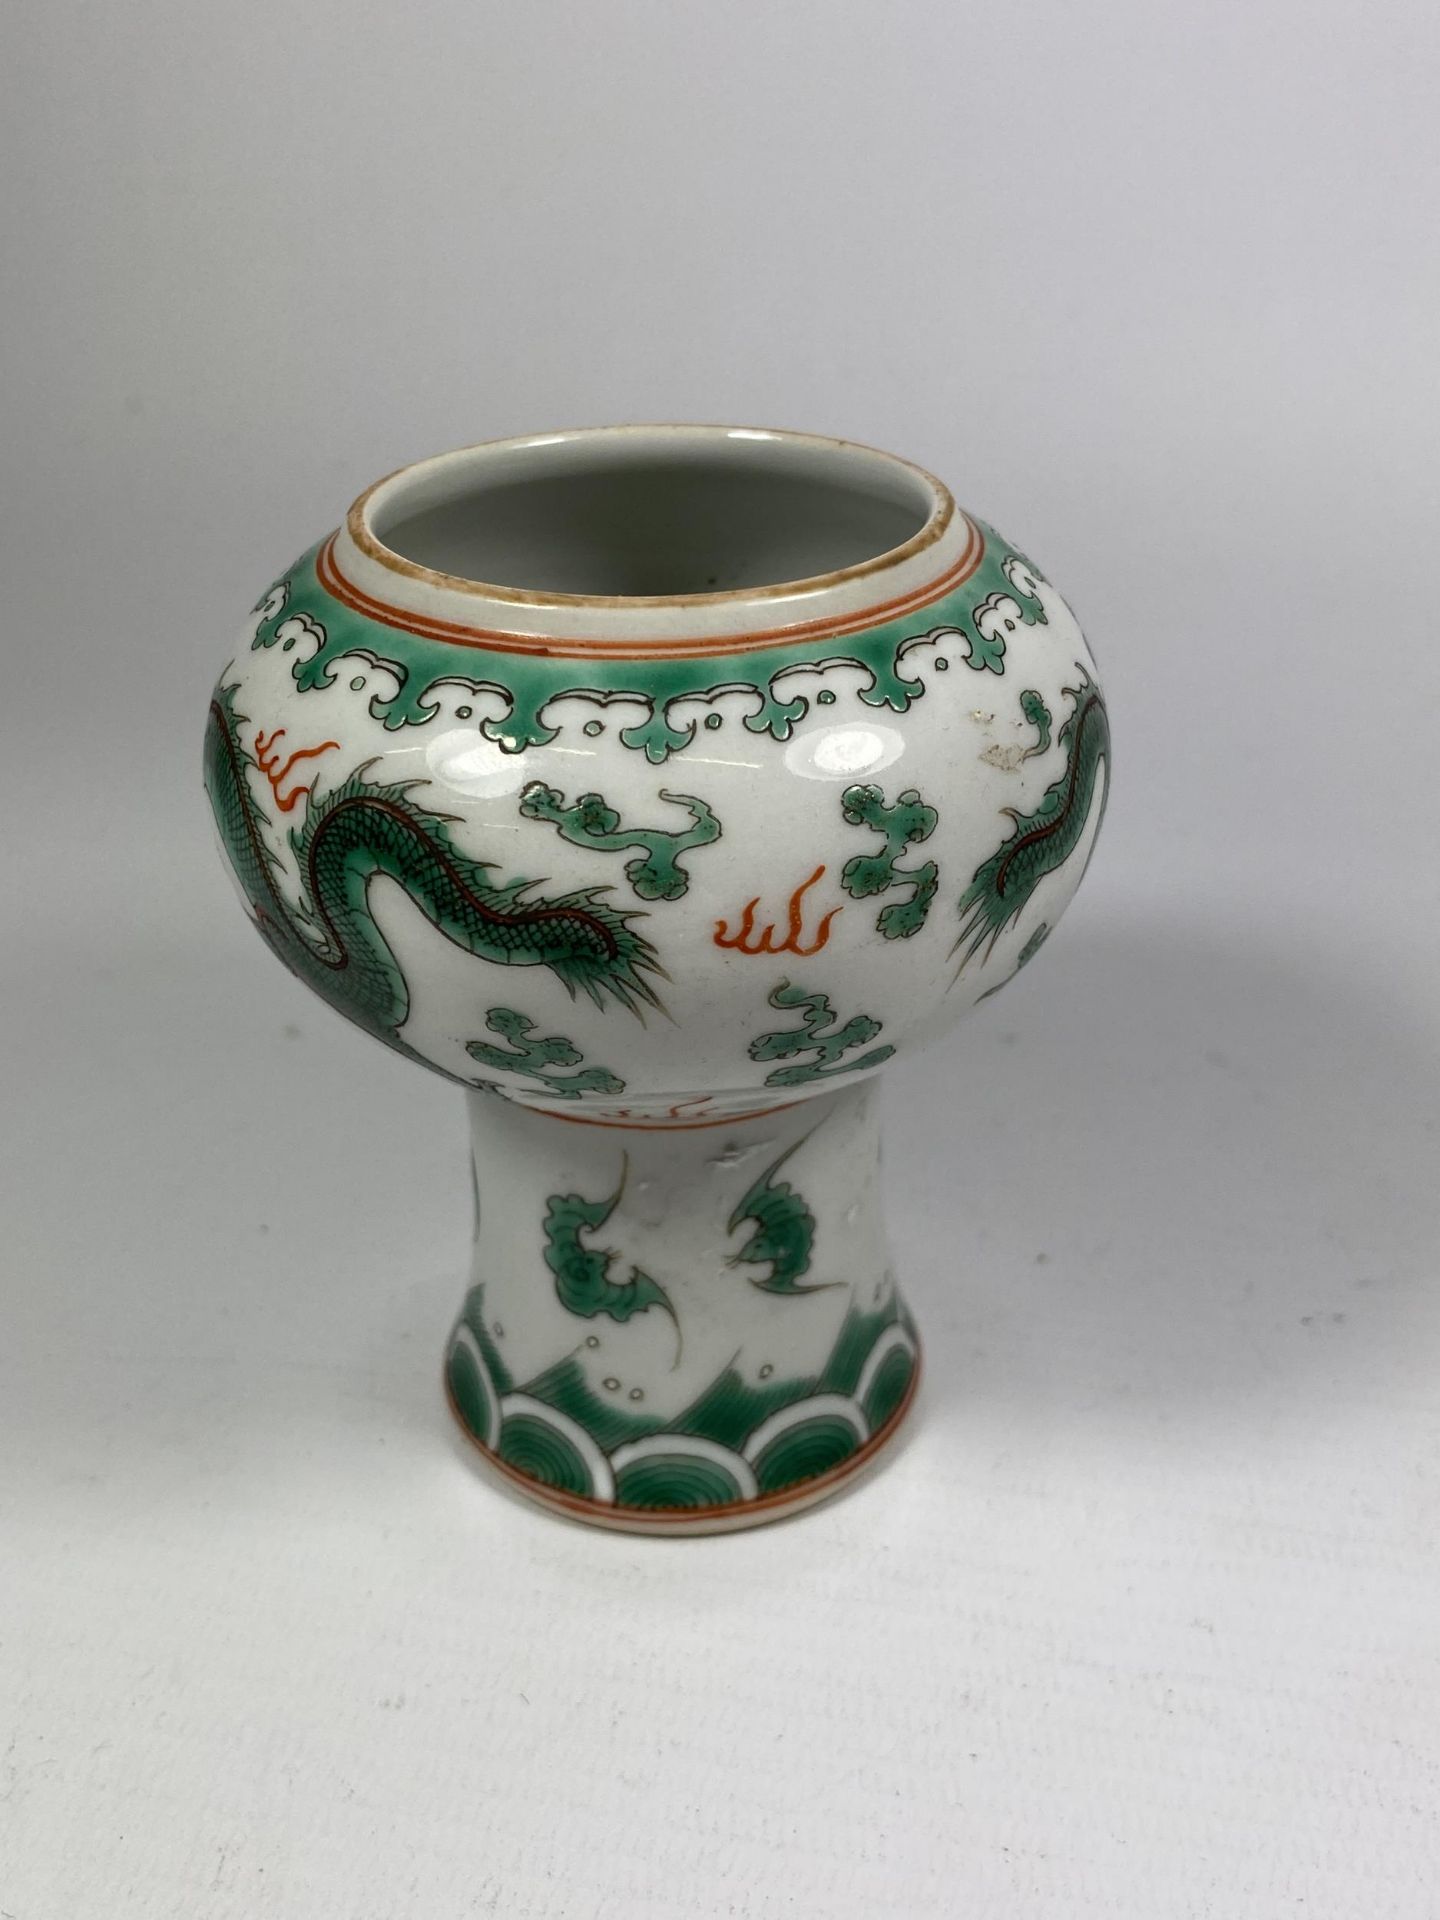 A CHINESE FAMILLE VERTE STEM CUP / VASE WITH DRAGON CHASING FLAMING PEARL DESIGN, SIX CHARACTER MARK - Image 2 of 4